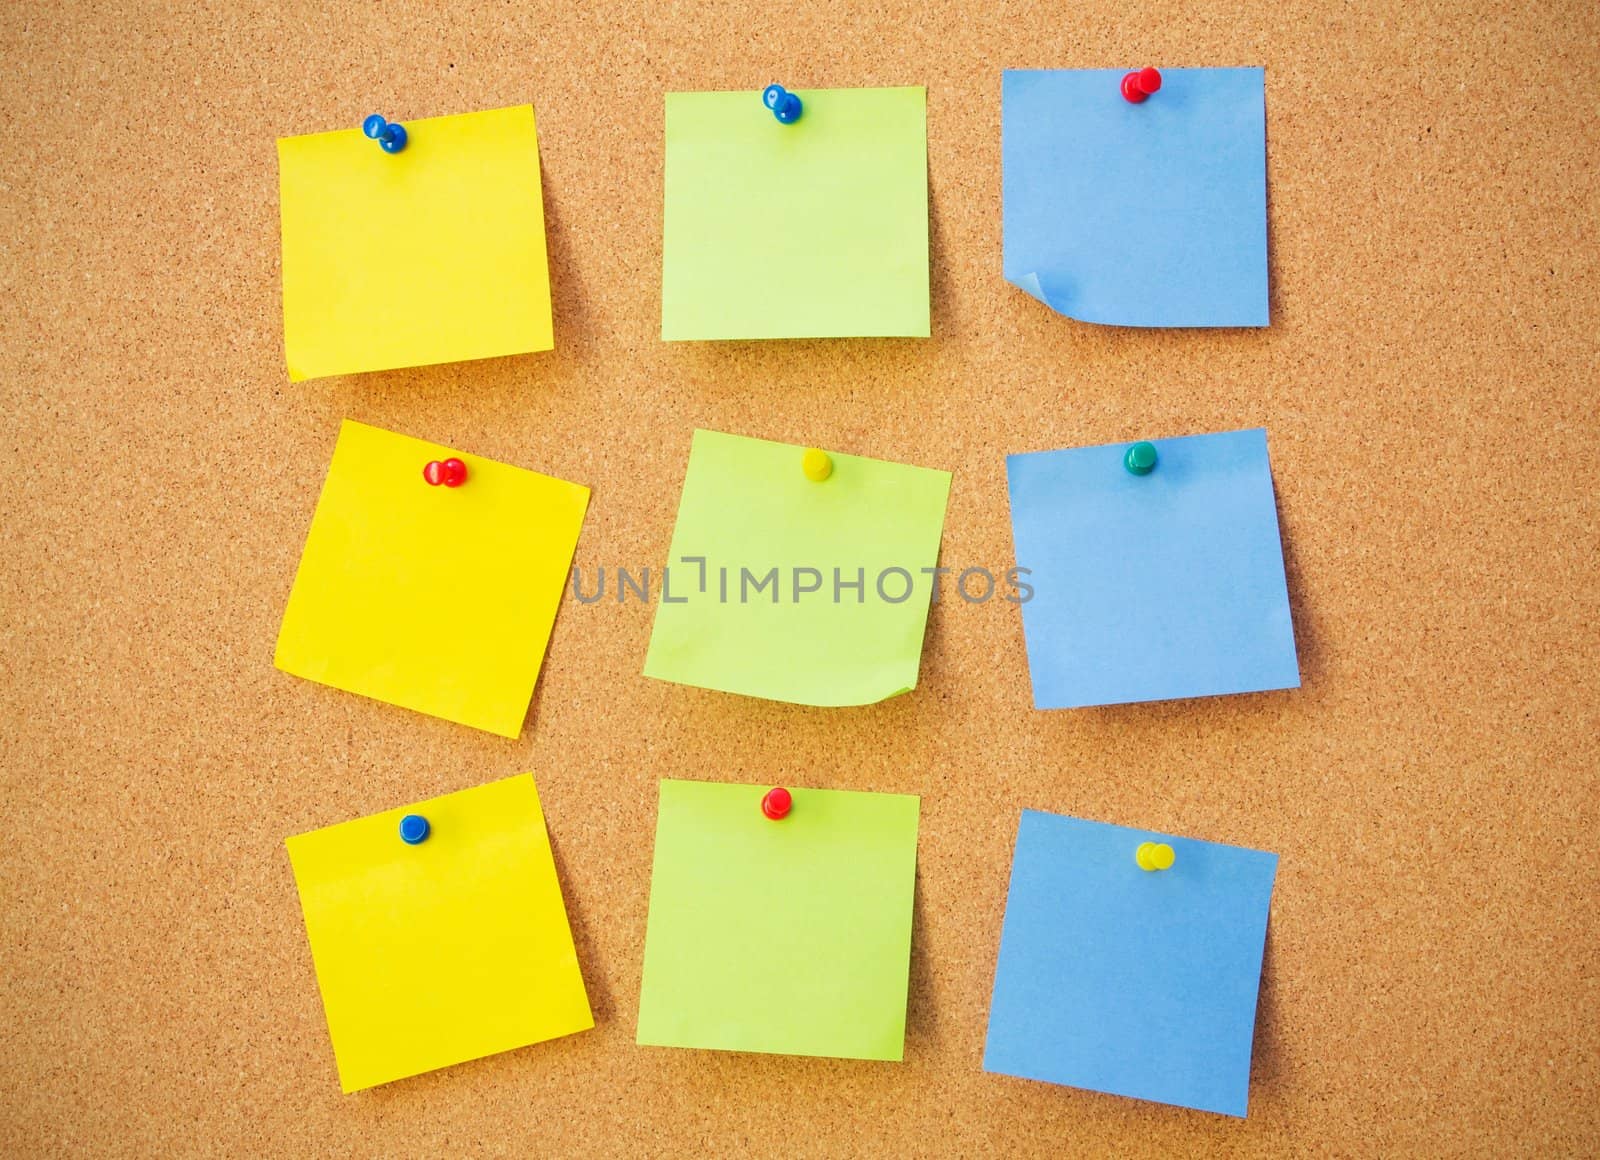 Colour note papers on pin board. Cork background  by simpson33